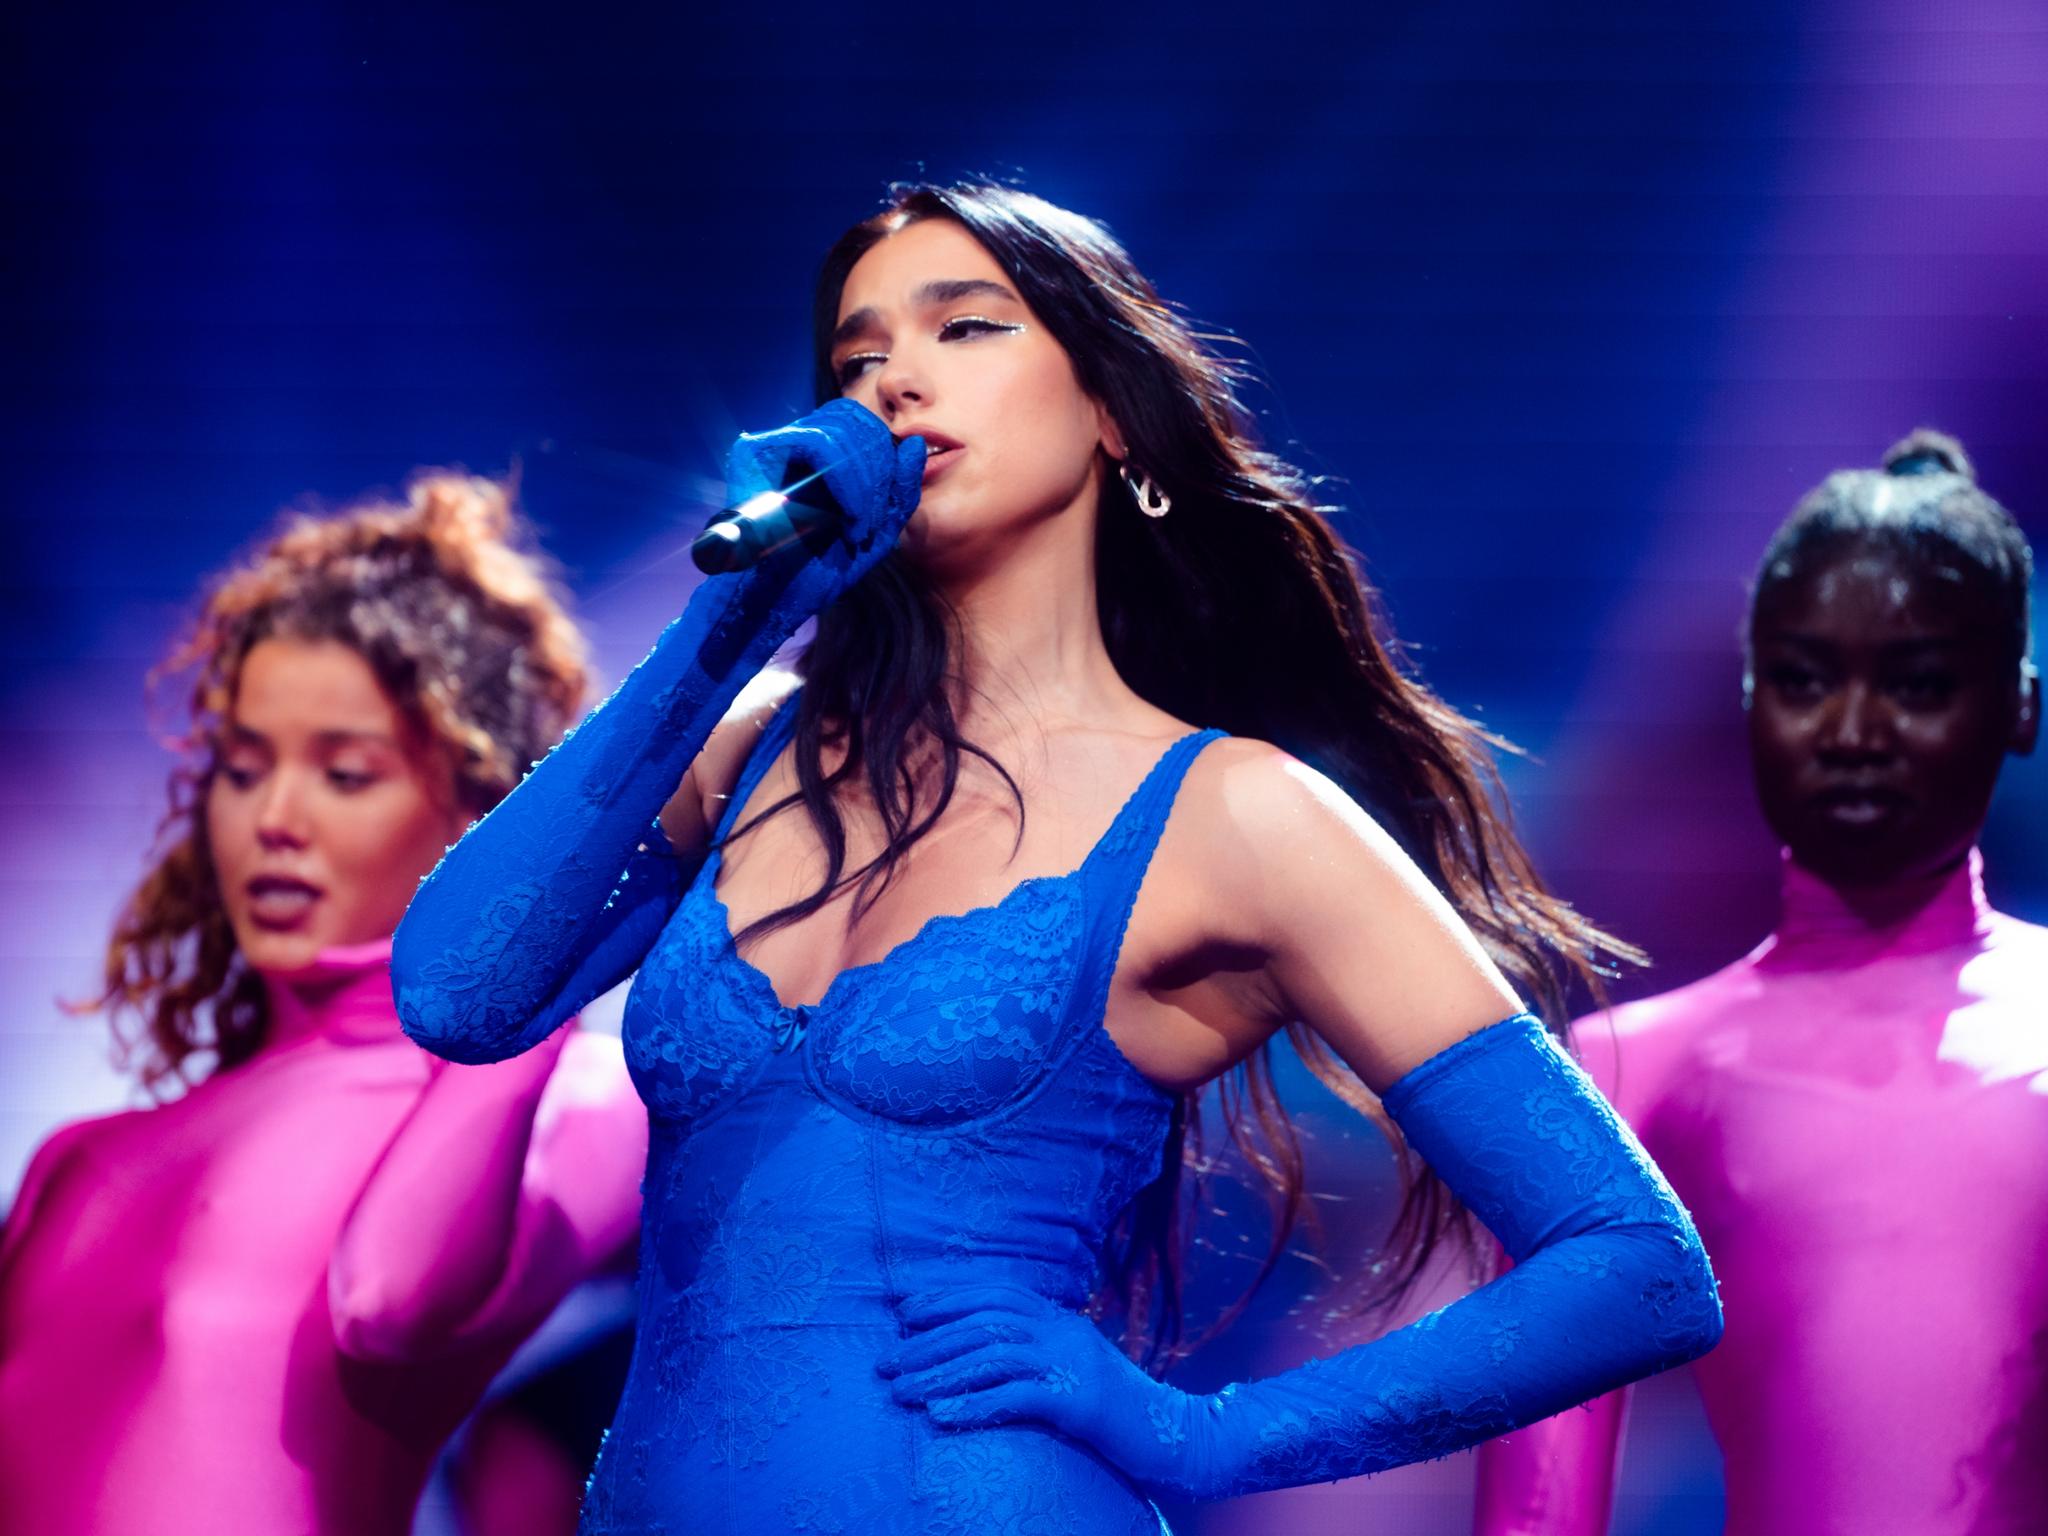 Live review Dua Lipa’s polished pop perfection from true ‘female alpha